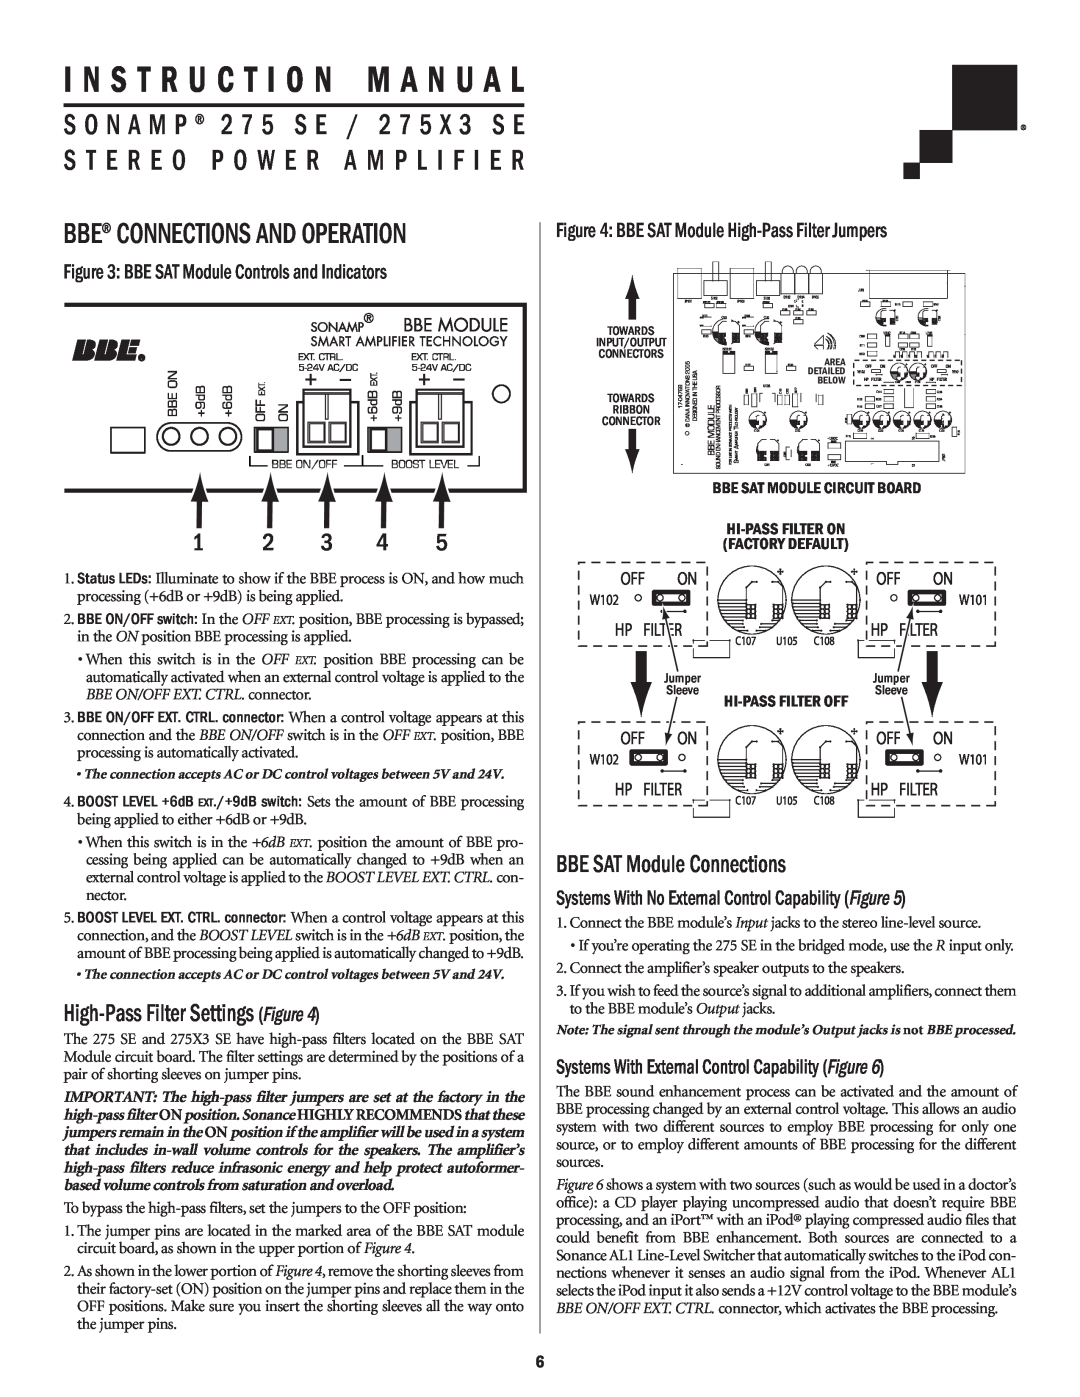 Sonance Sonamp 275 SE Bbe Connections And Operation, High-Pass Filter Settings Figure, BBE SAT Module Connections 